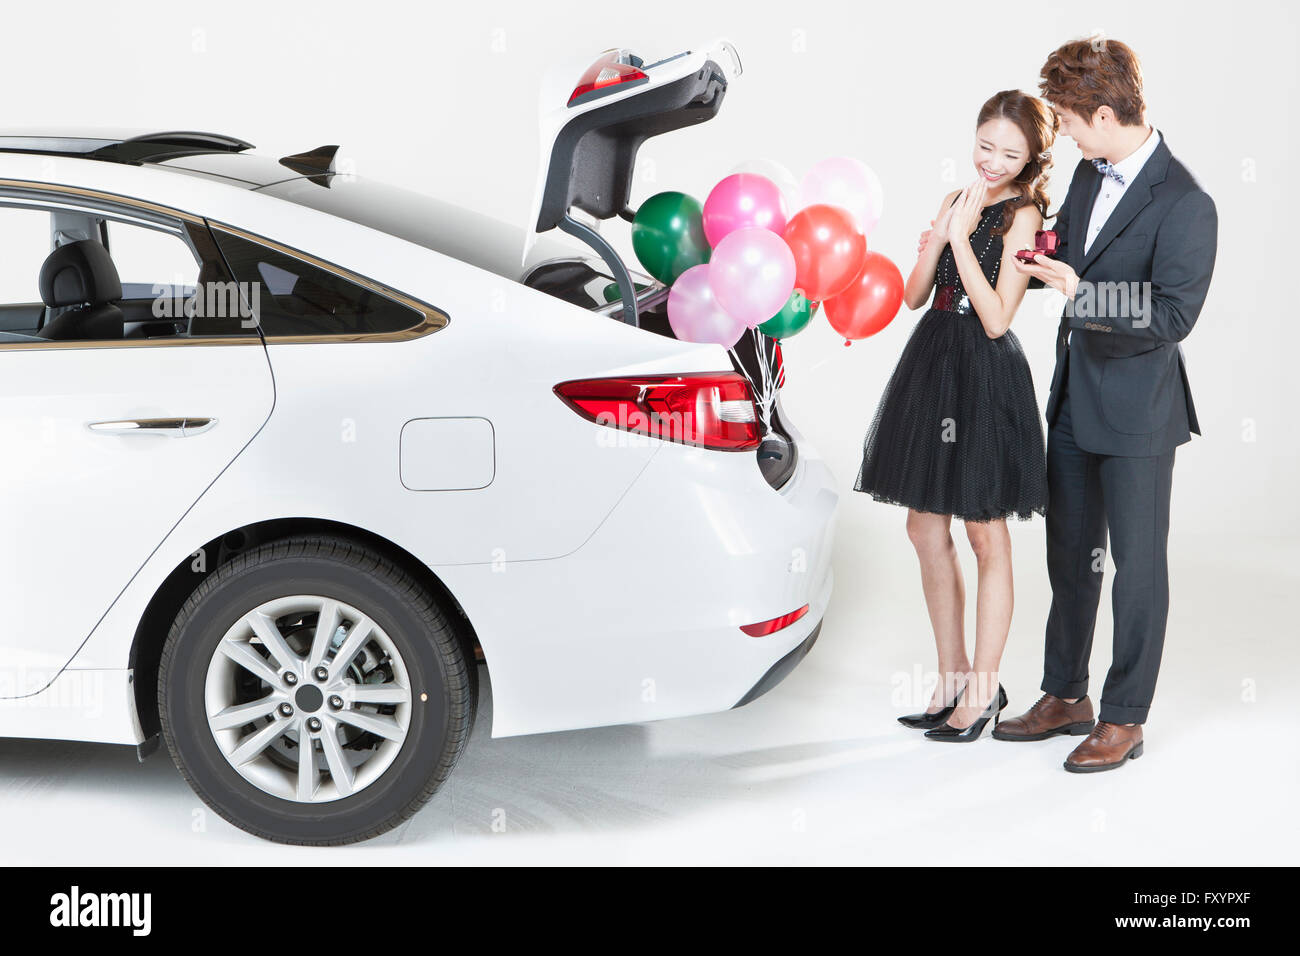 Woman delighted with present from man behind a catr with open trunk and balloons on it Stock Photo